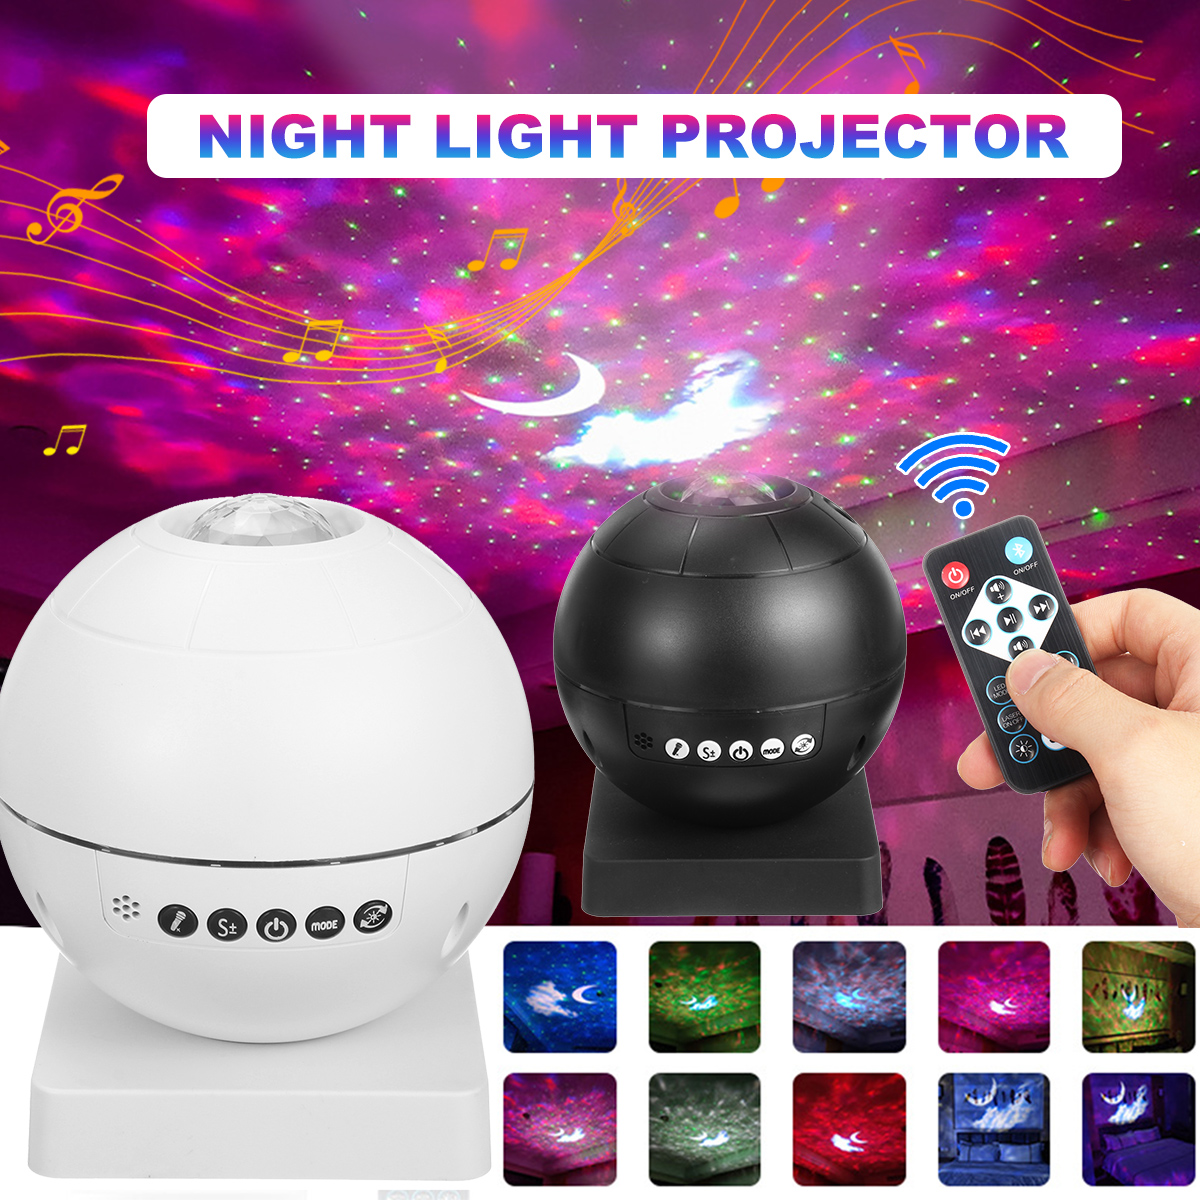 Bakeey-Star-Projector-Light-Night-Lamp-Music-Player-LED-Starry-Sky-Ocean-Wave-with-Remote-1910714-1